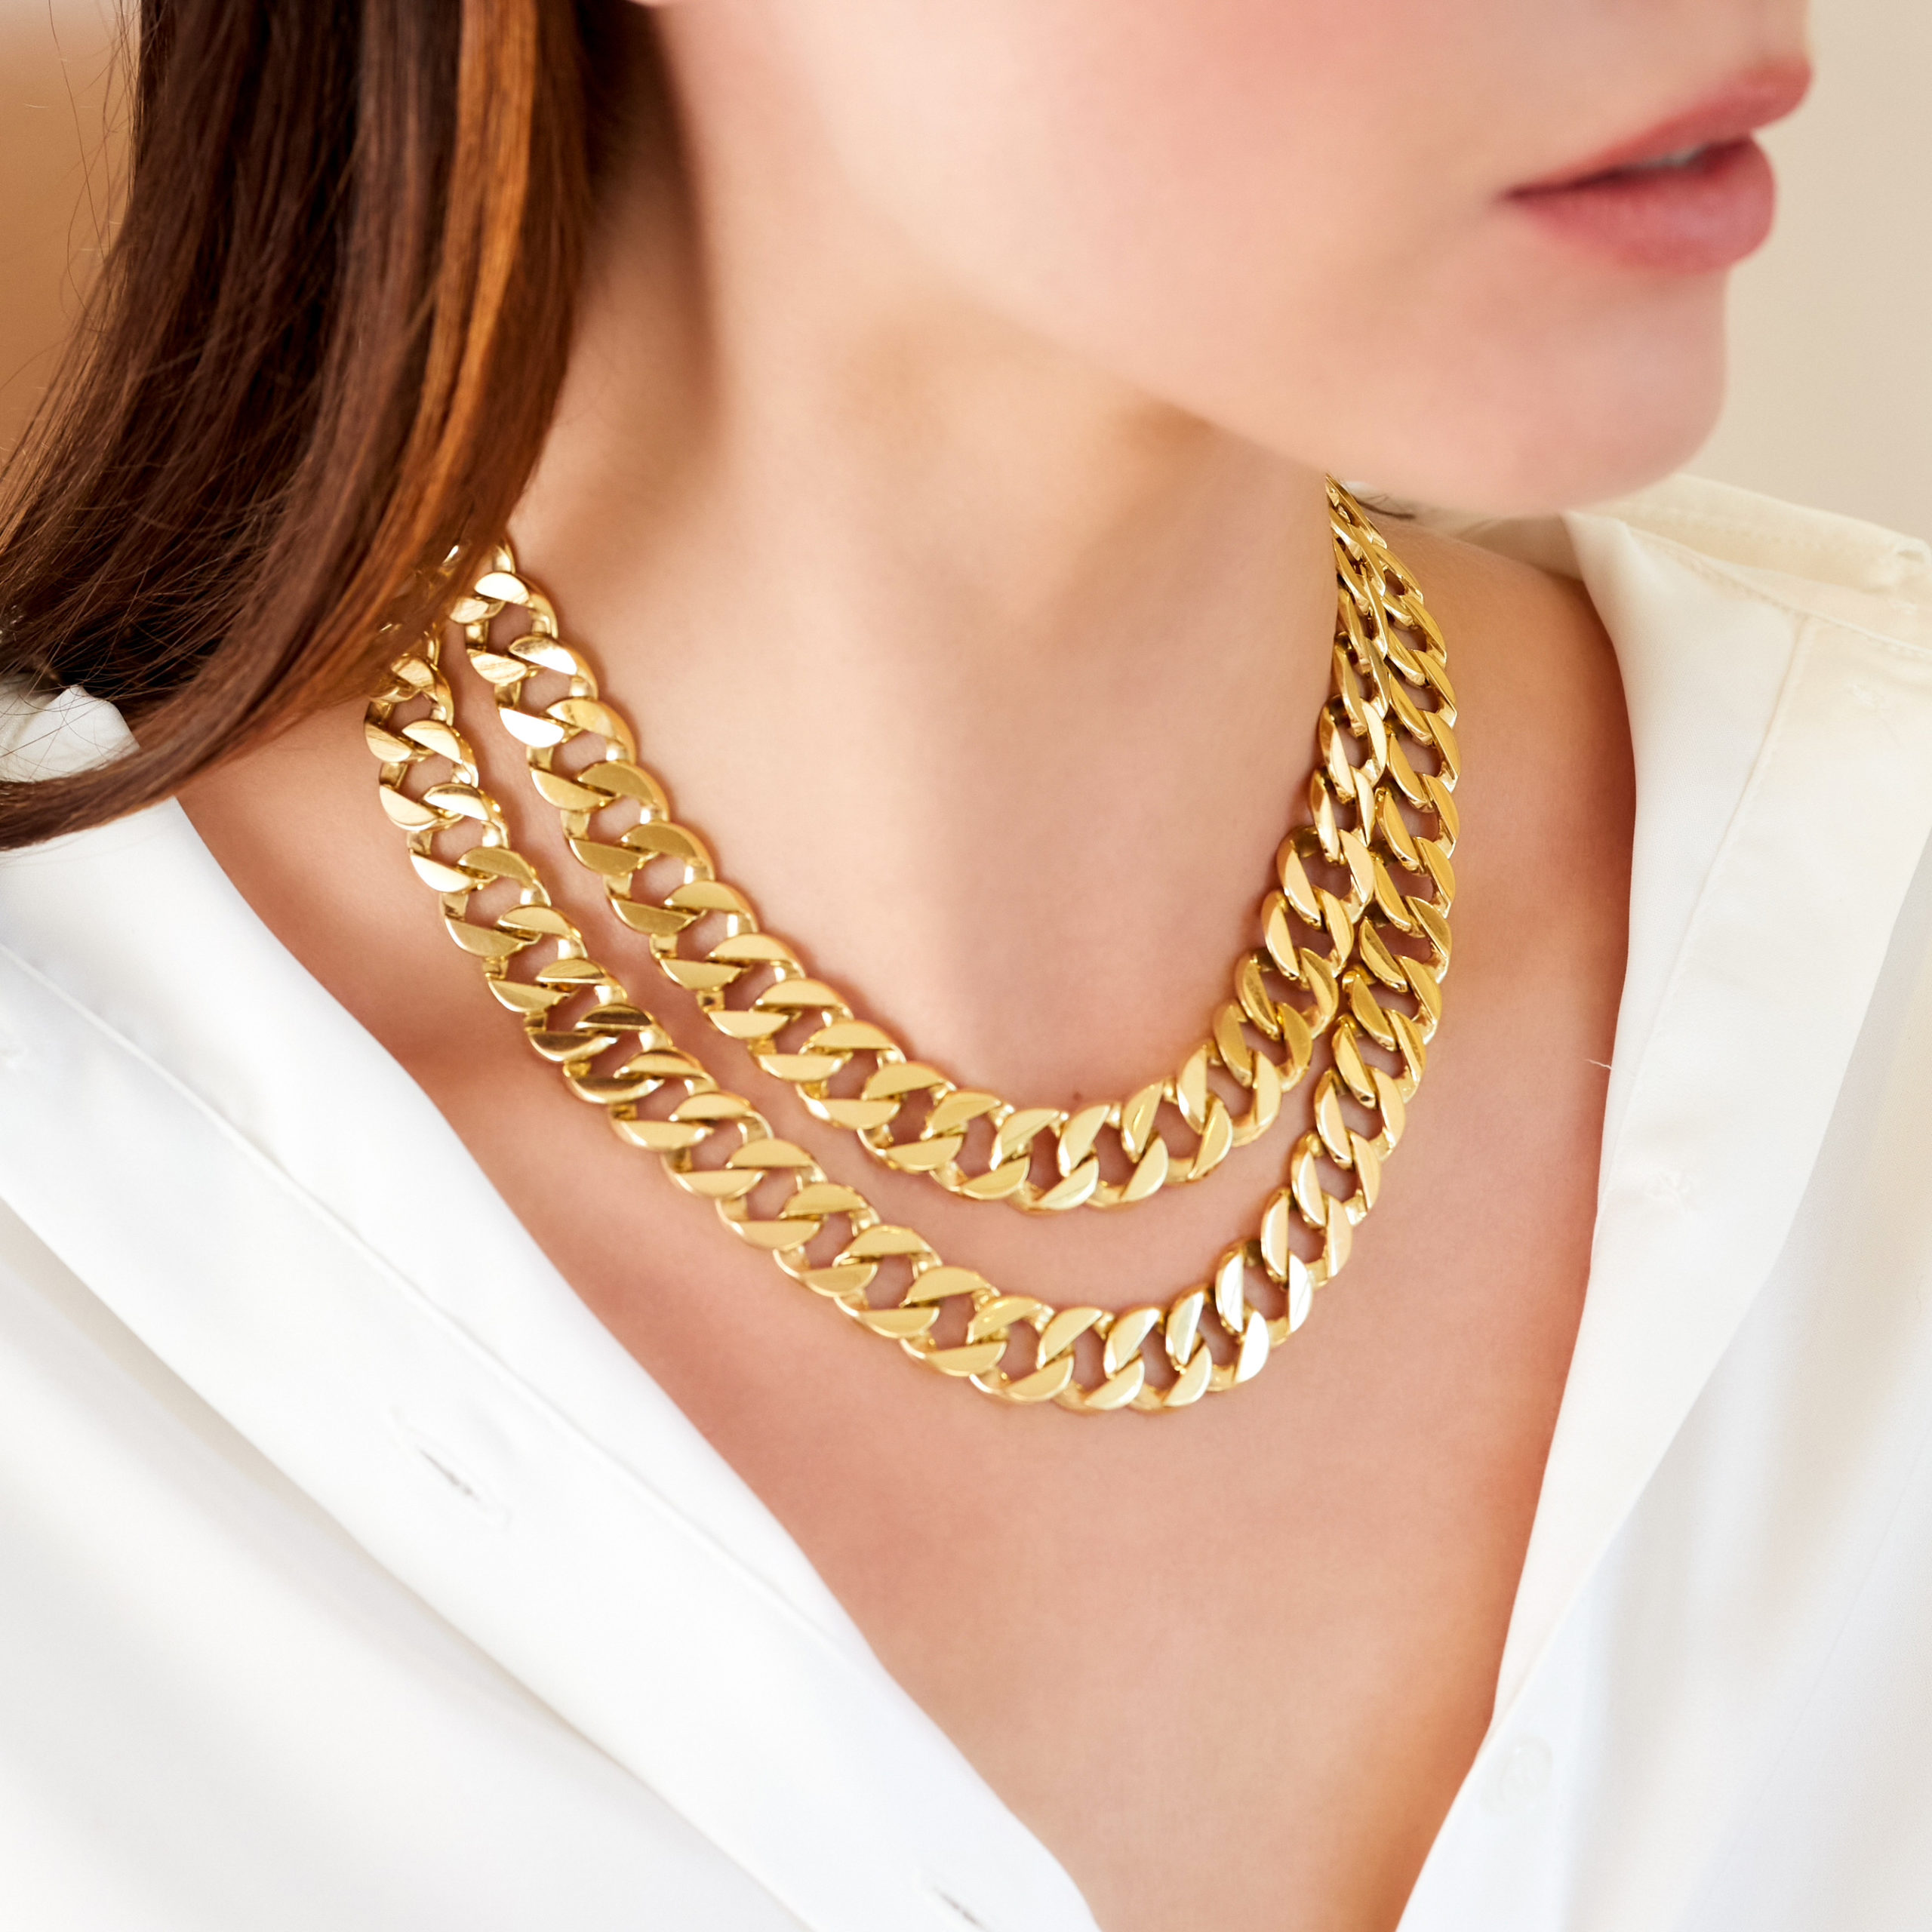 Double Wrap Curb-Link Necklace on model